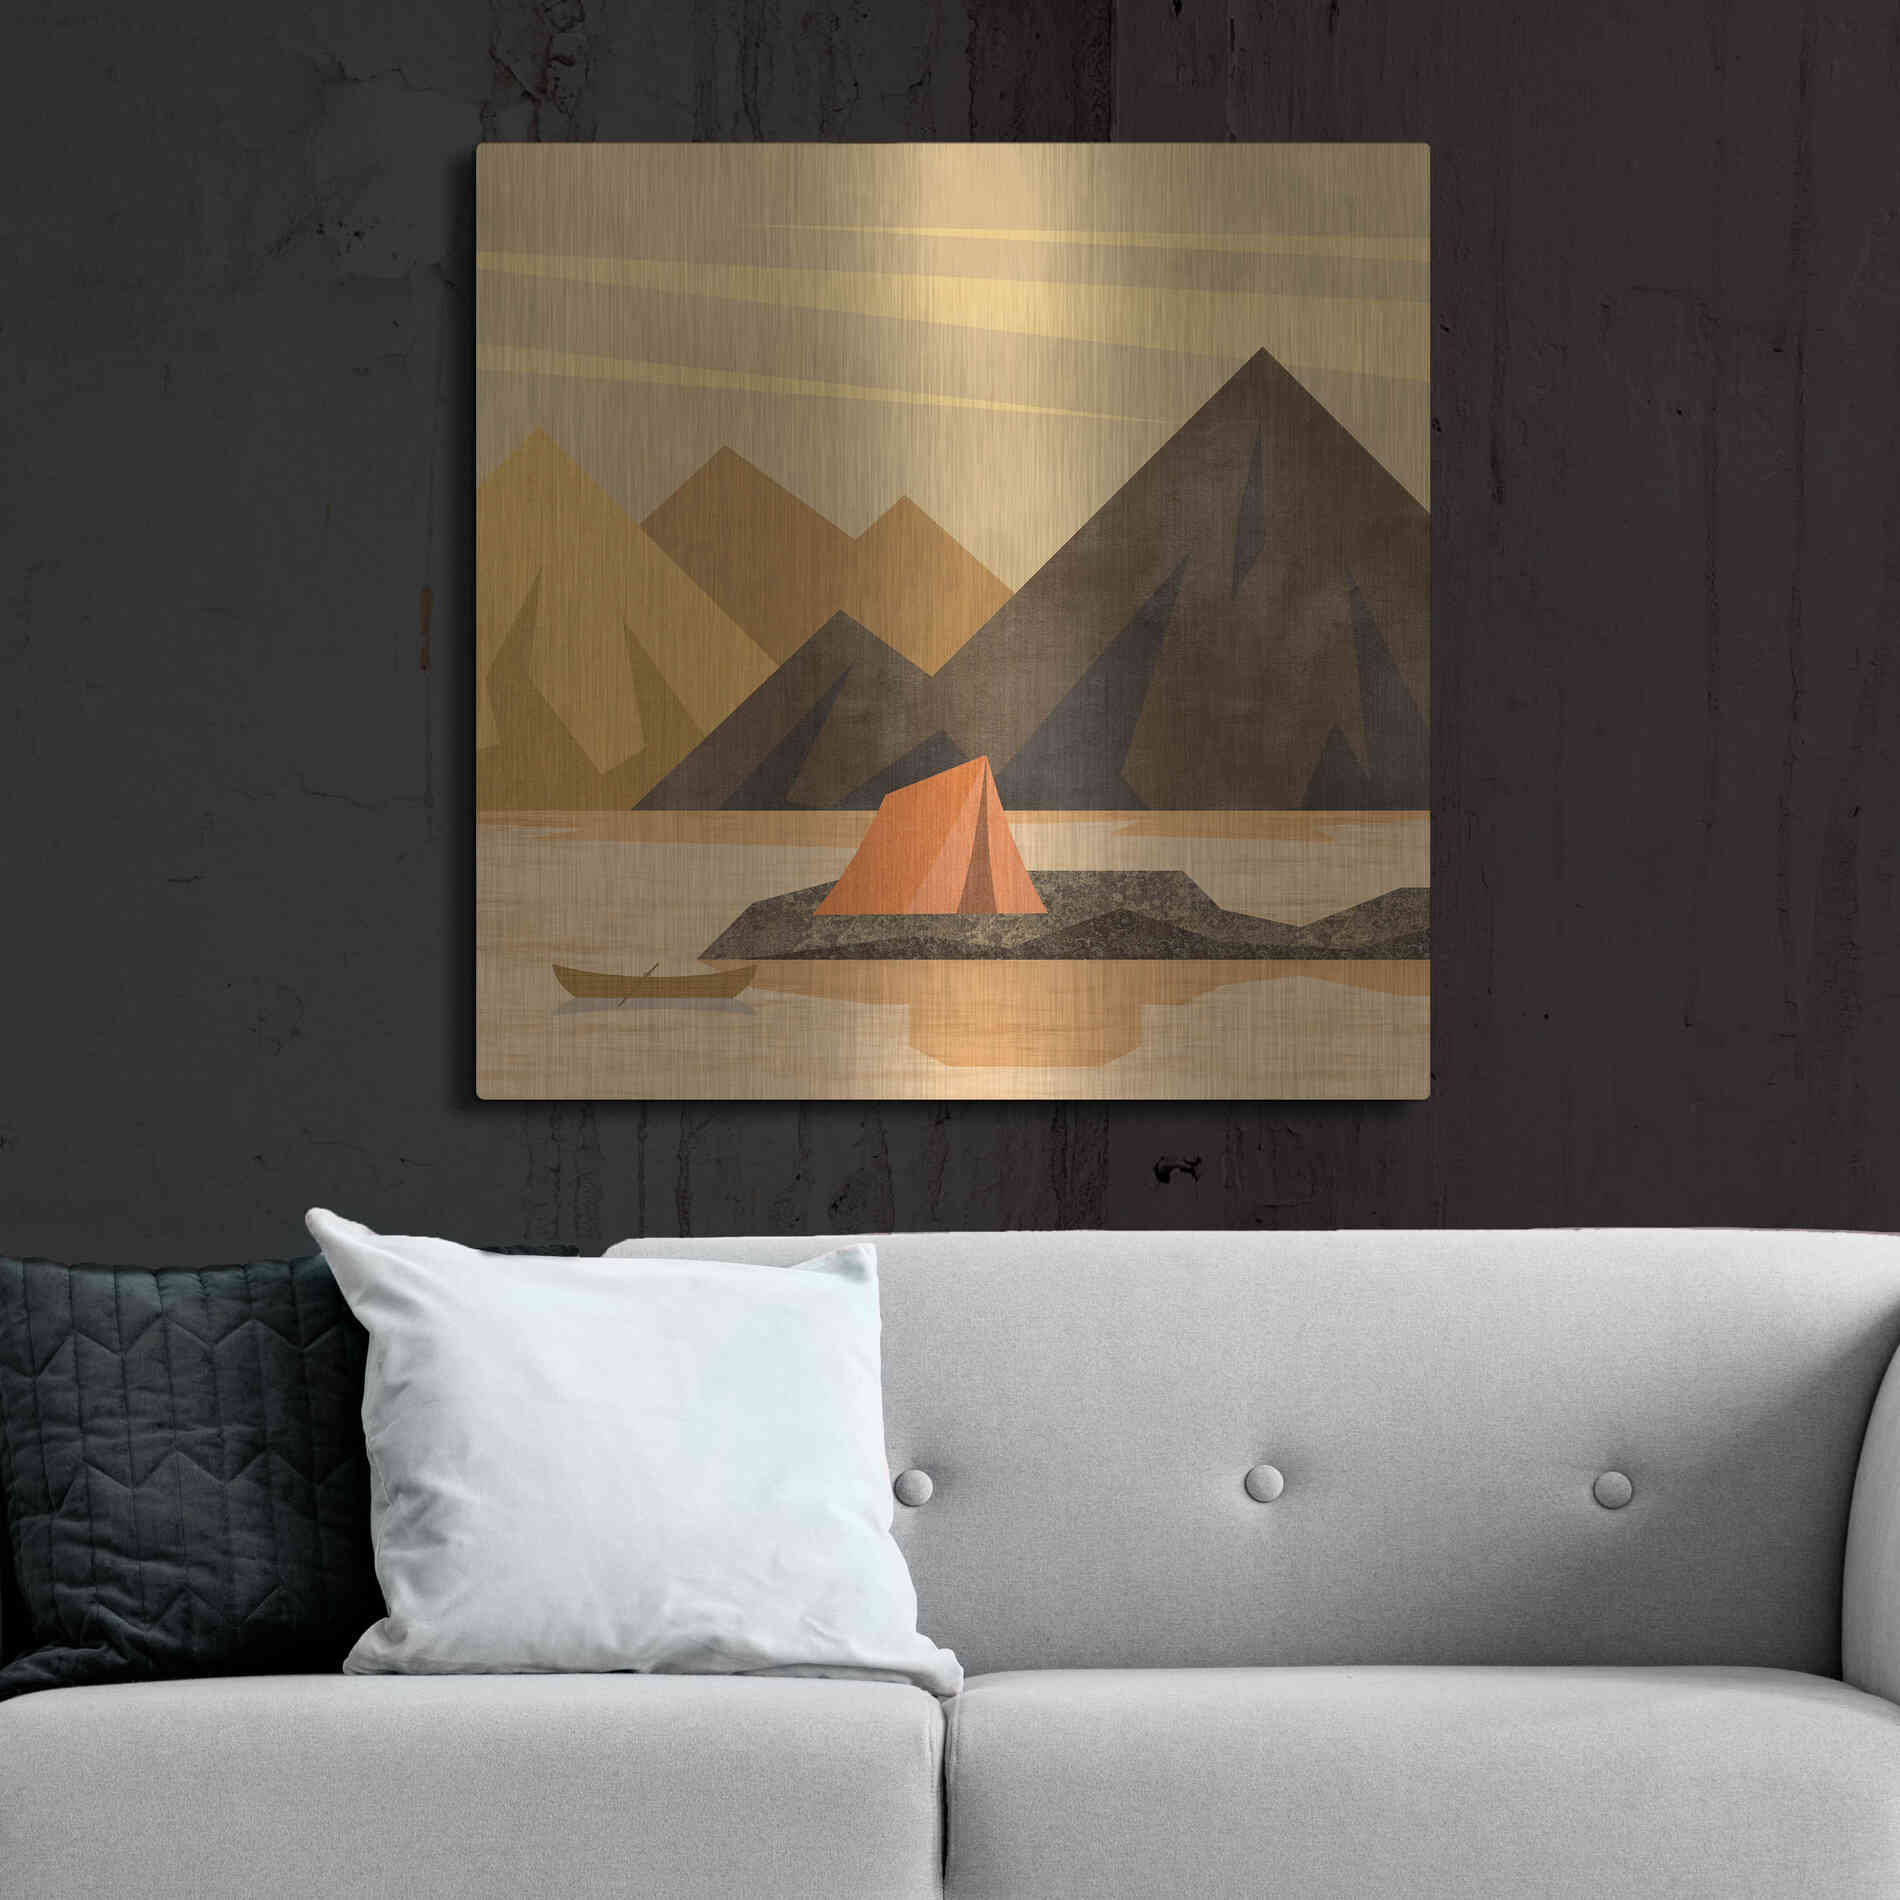 Luxe Metal Art 'Camping Adventure' by Andrea Haase, Metal Wall At,36x36